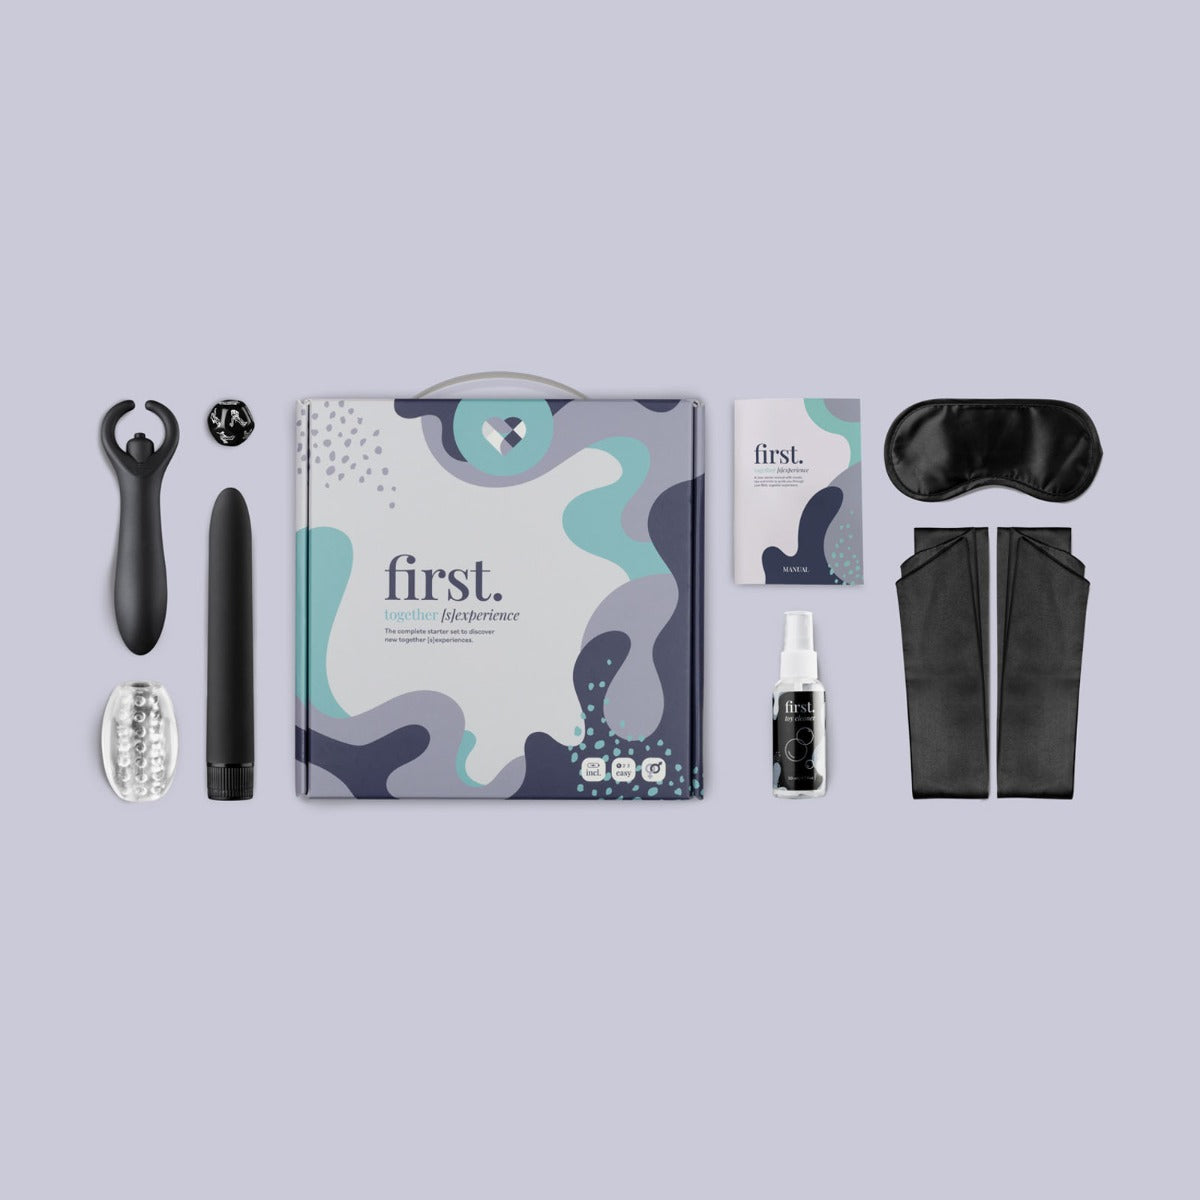 Loveboxxx | First. Together [S]Experience Couples Sex Toy Starter Set